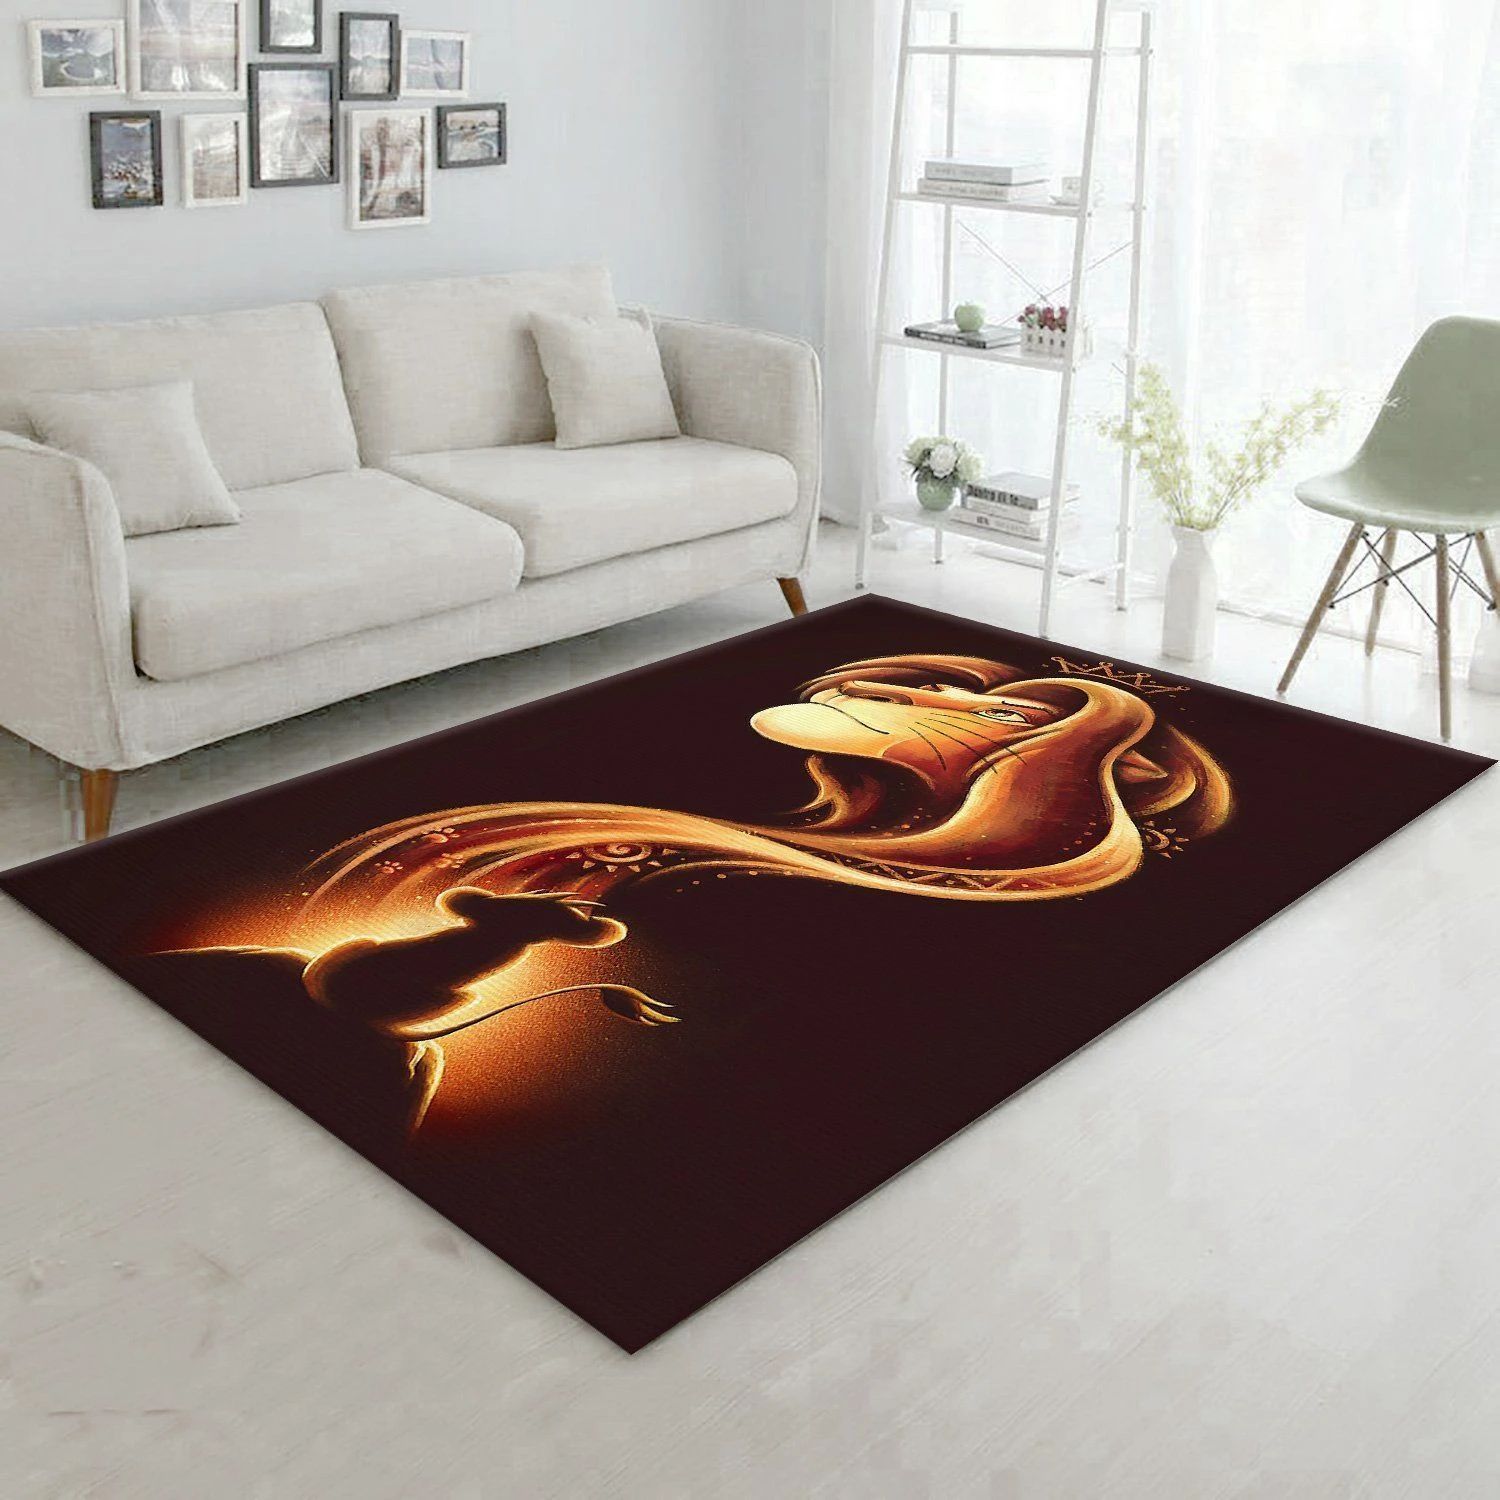 Disney Movie The Lion King Area Rug Home Decor HomeBeautyUS Modern Rugs - Indoor Outdoor Rugs